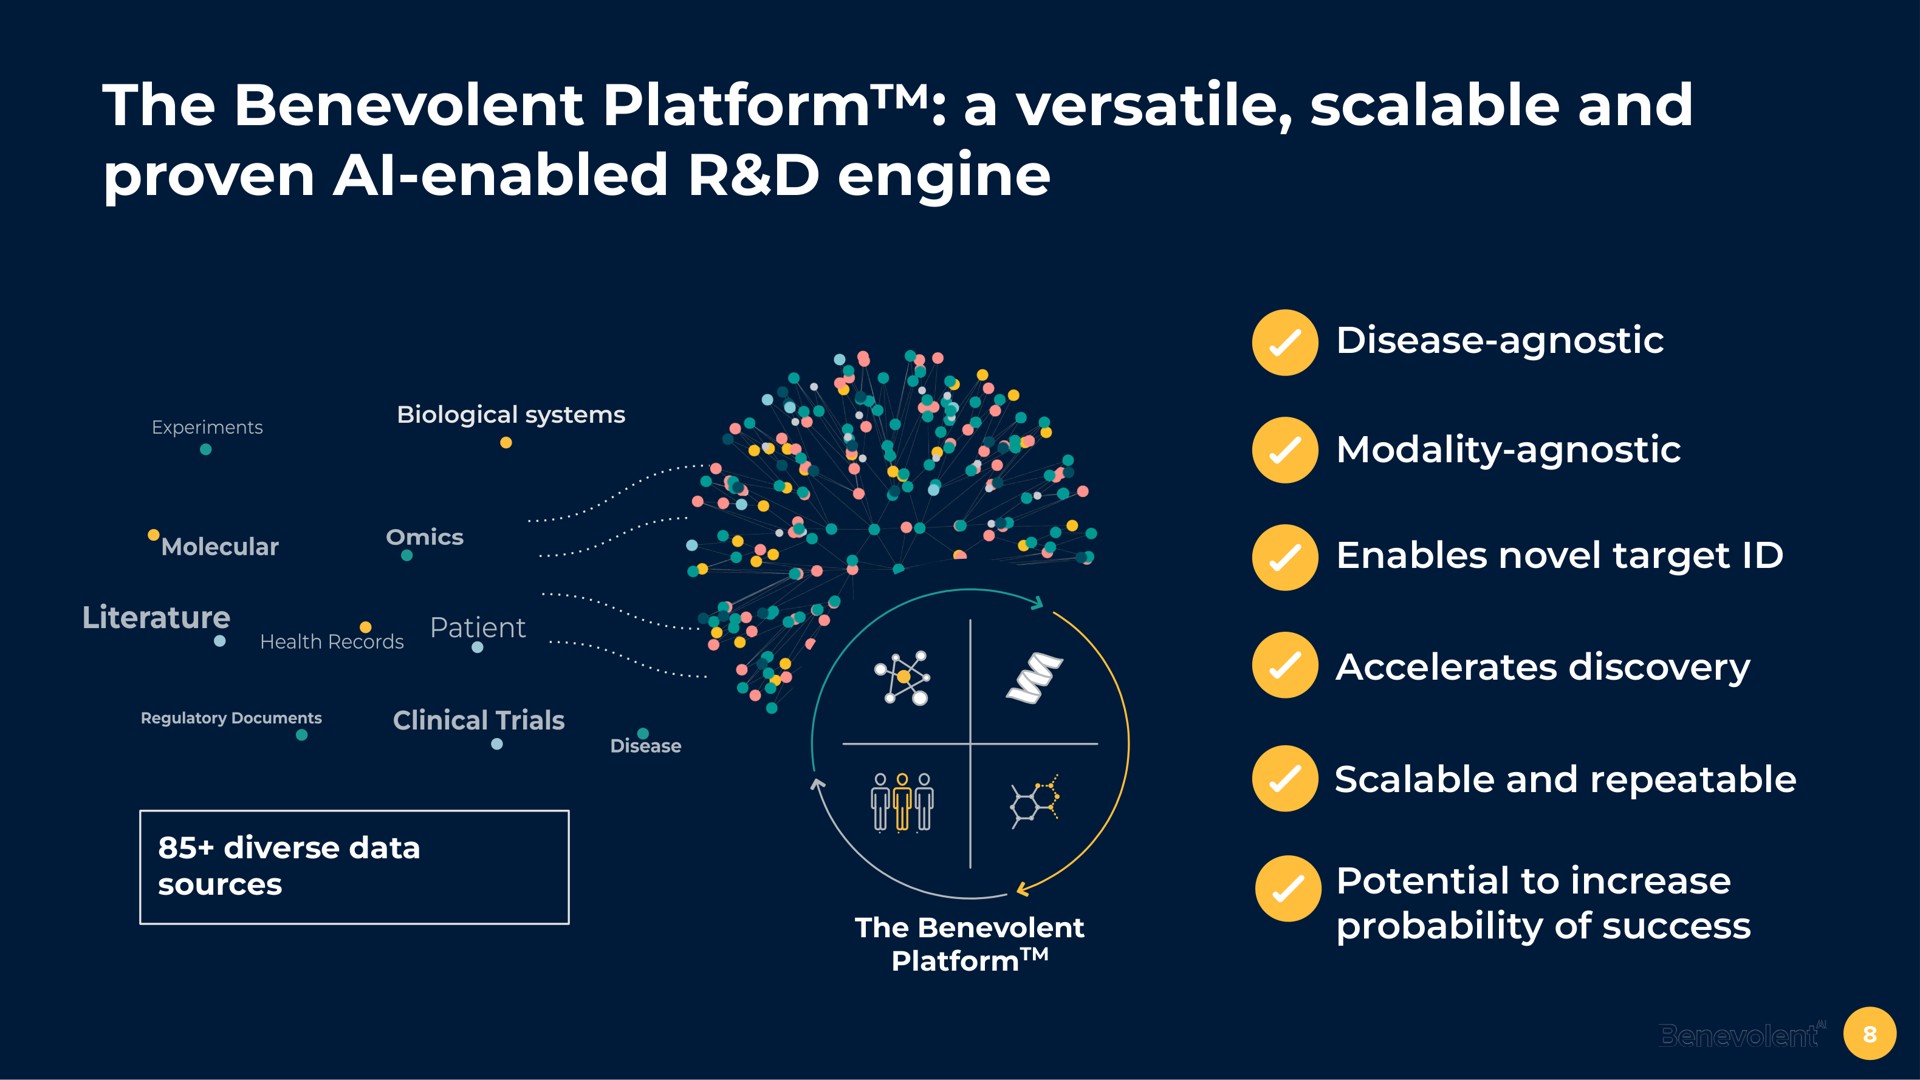 the benevolent platform a versatile scalable and proven enabled engine diverse data sources the benevolent disease agnostic modality agnostic enables novel target accelerates discovery scalable and repeatable potential to increase probability of success enabled | BenevolentAI